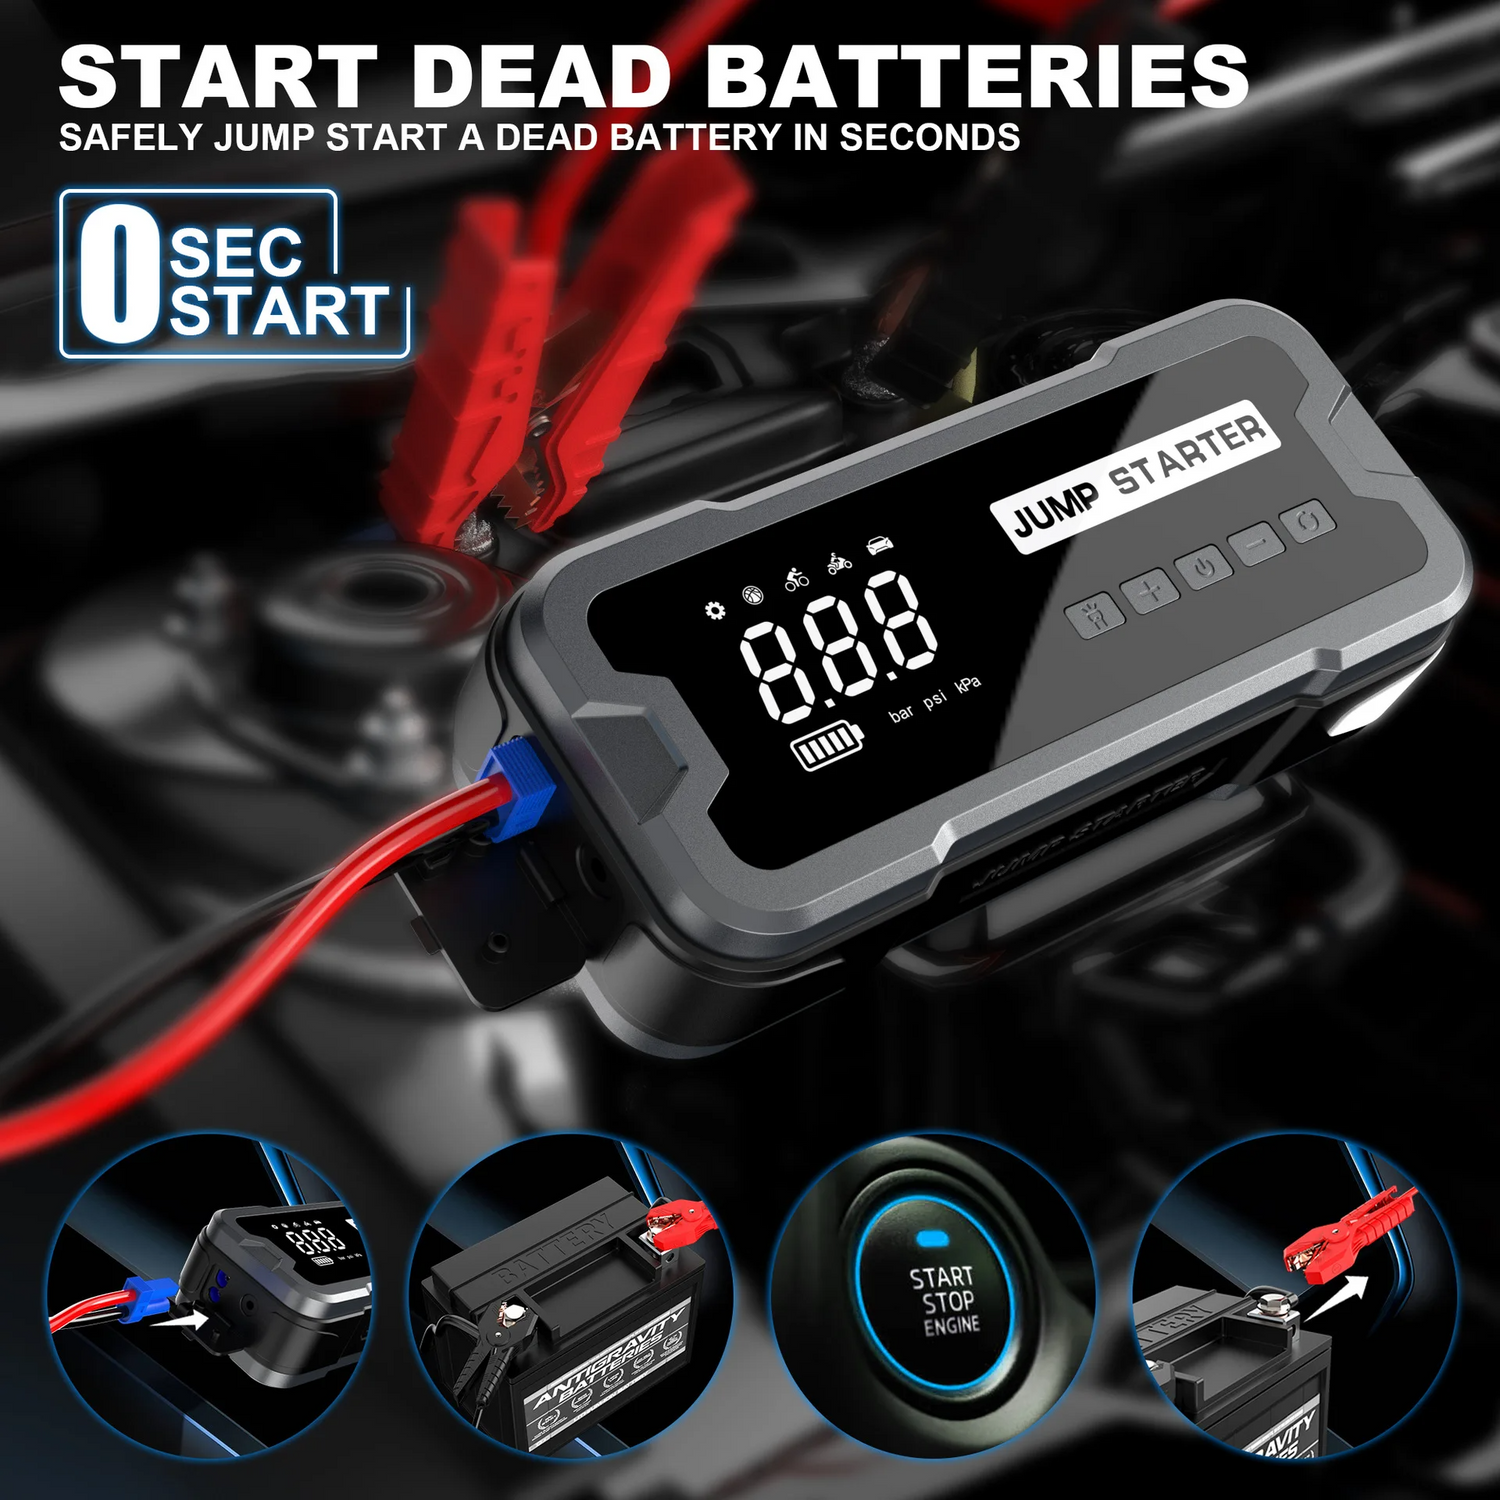 Are you tired of the frustration of a dead car or motorcycle battery? Imagine being able to start your vehicle anytime, anywhere without having to rely on help from others or waiting for roadside assistance.The 8000A 4 in 1 Portable Jump Starter breathes new life into your drained battery in seconds.